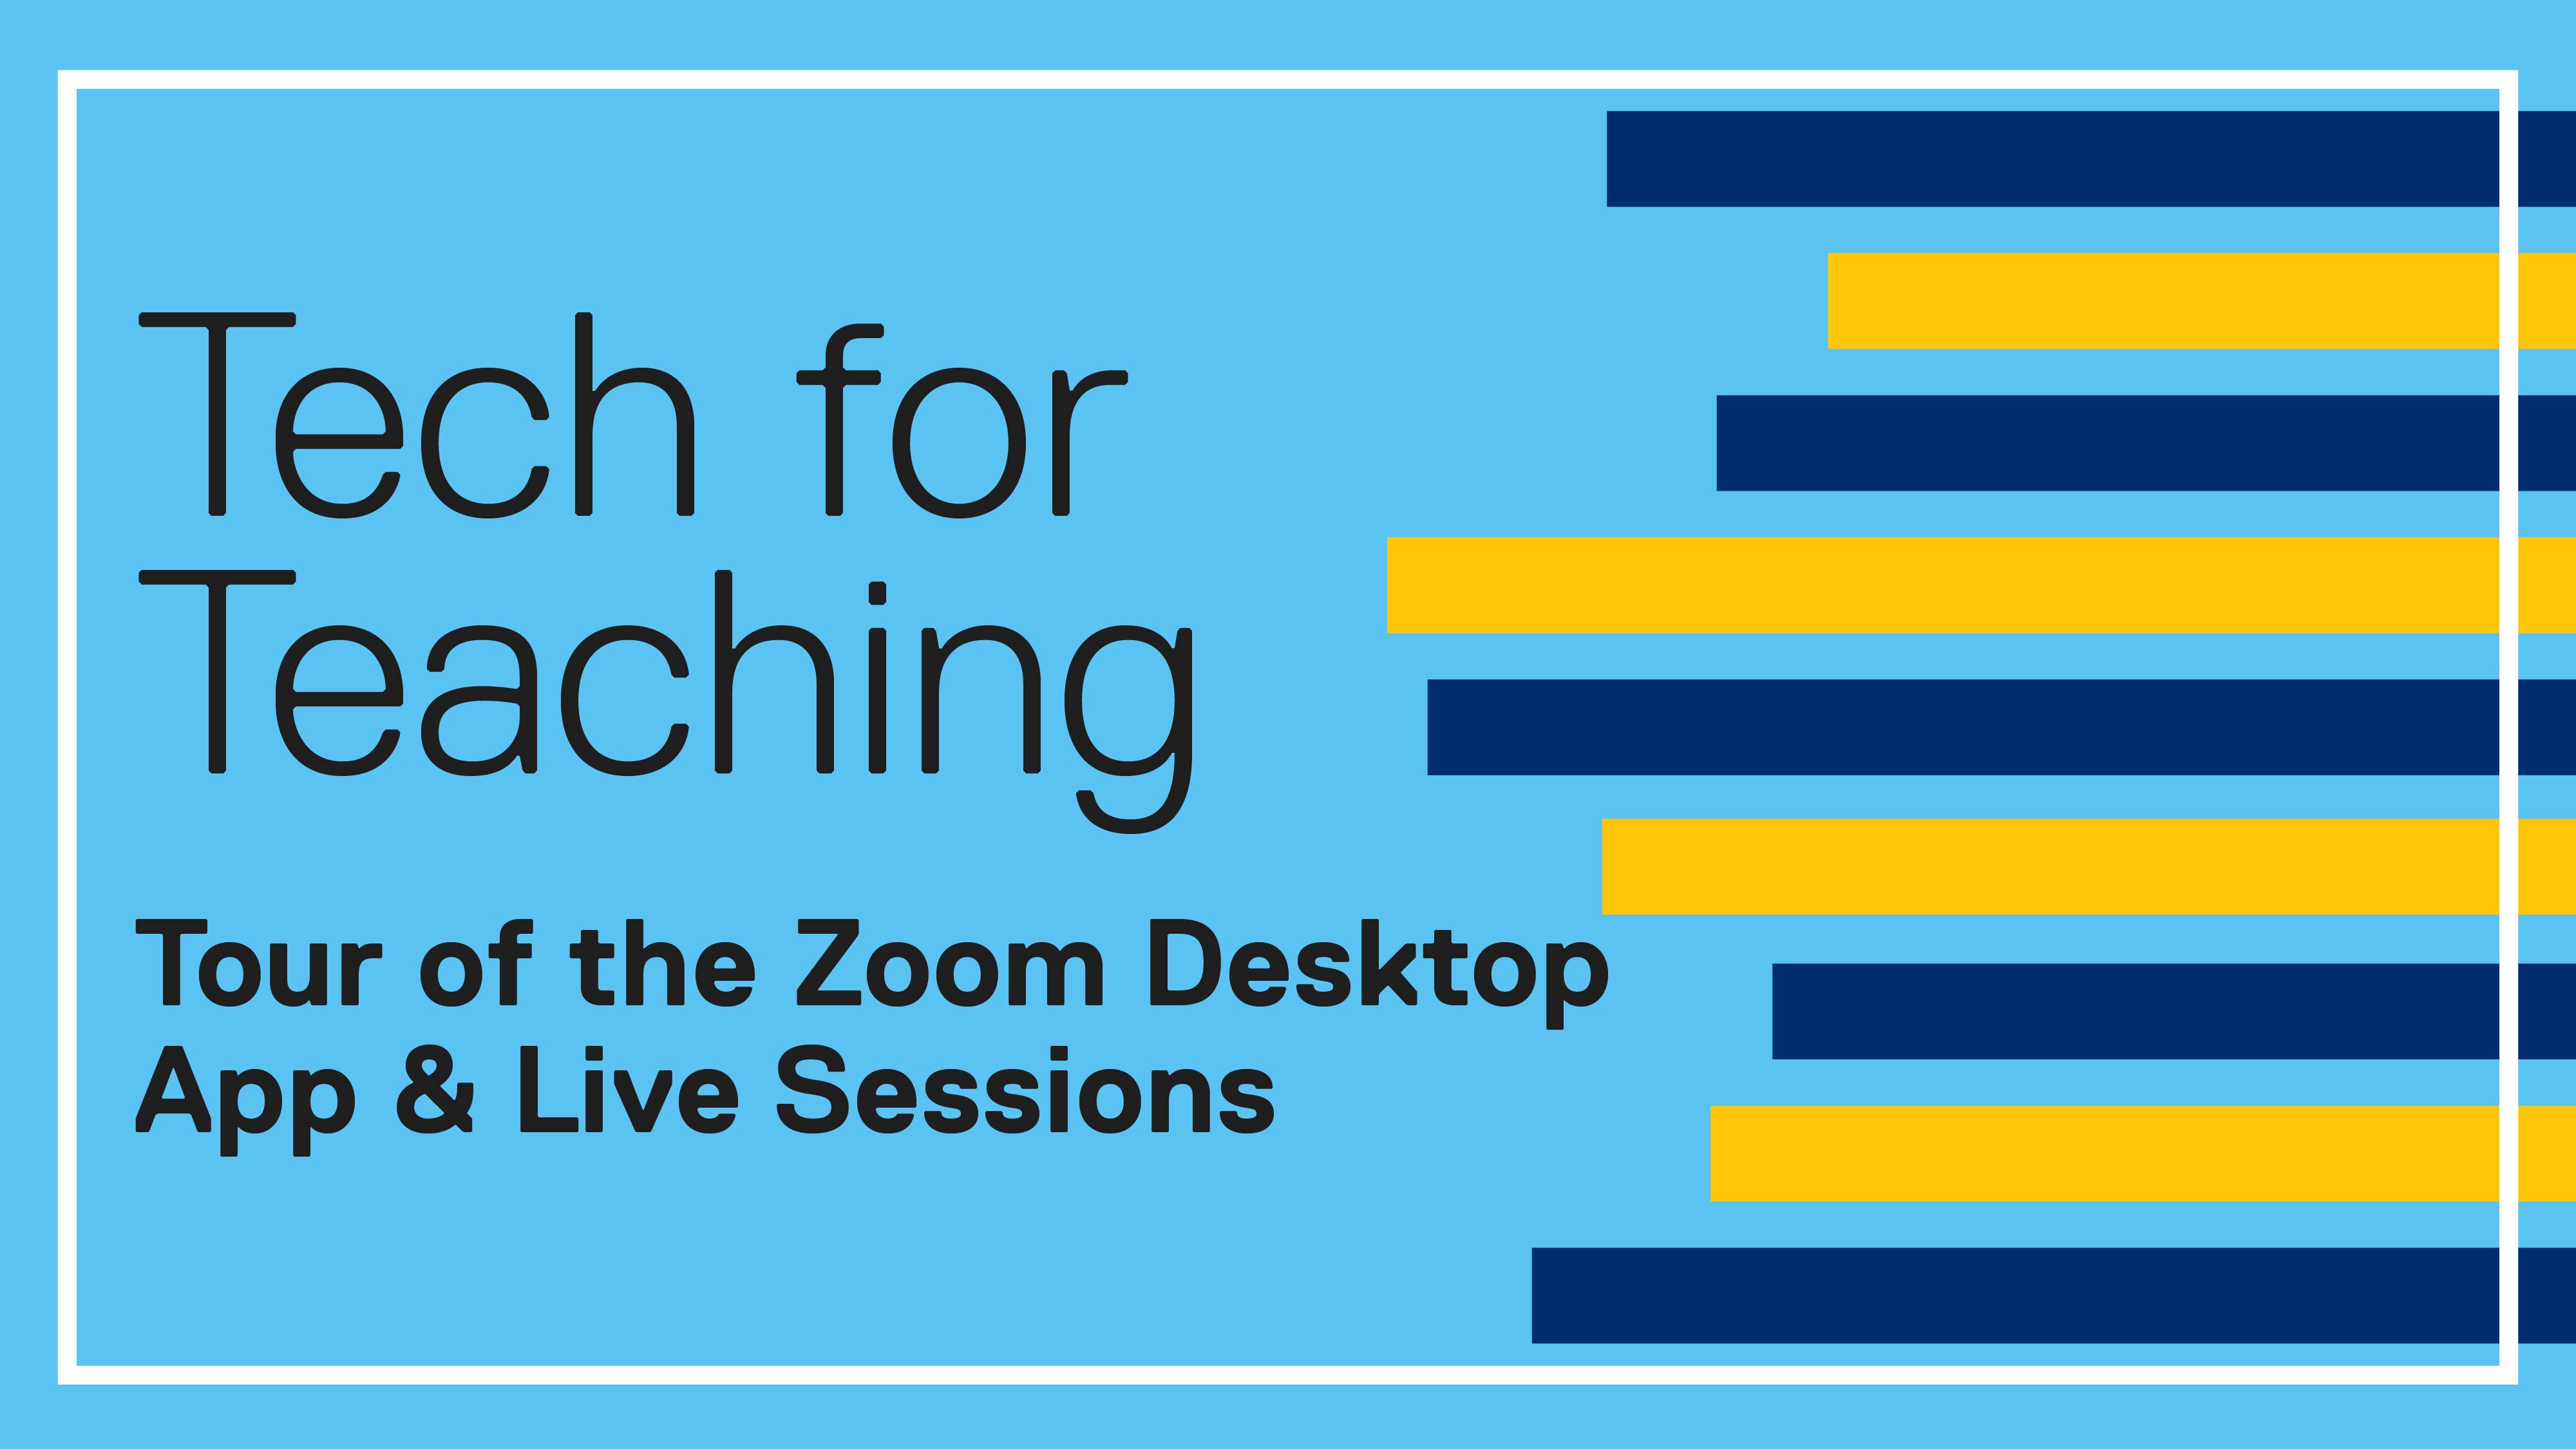 Tech for Teaching: Tour of the Zoom Desktop App & Live Sessions